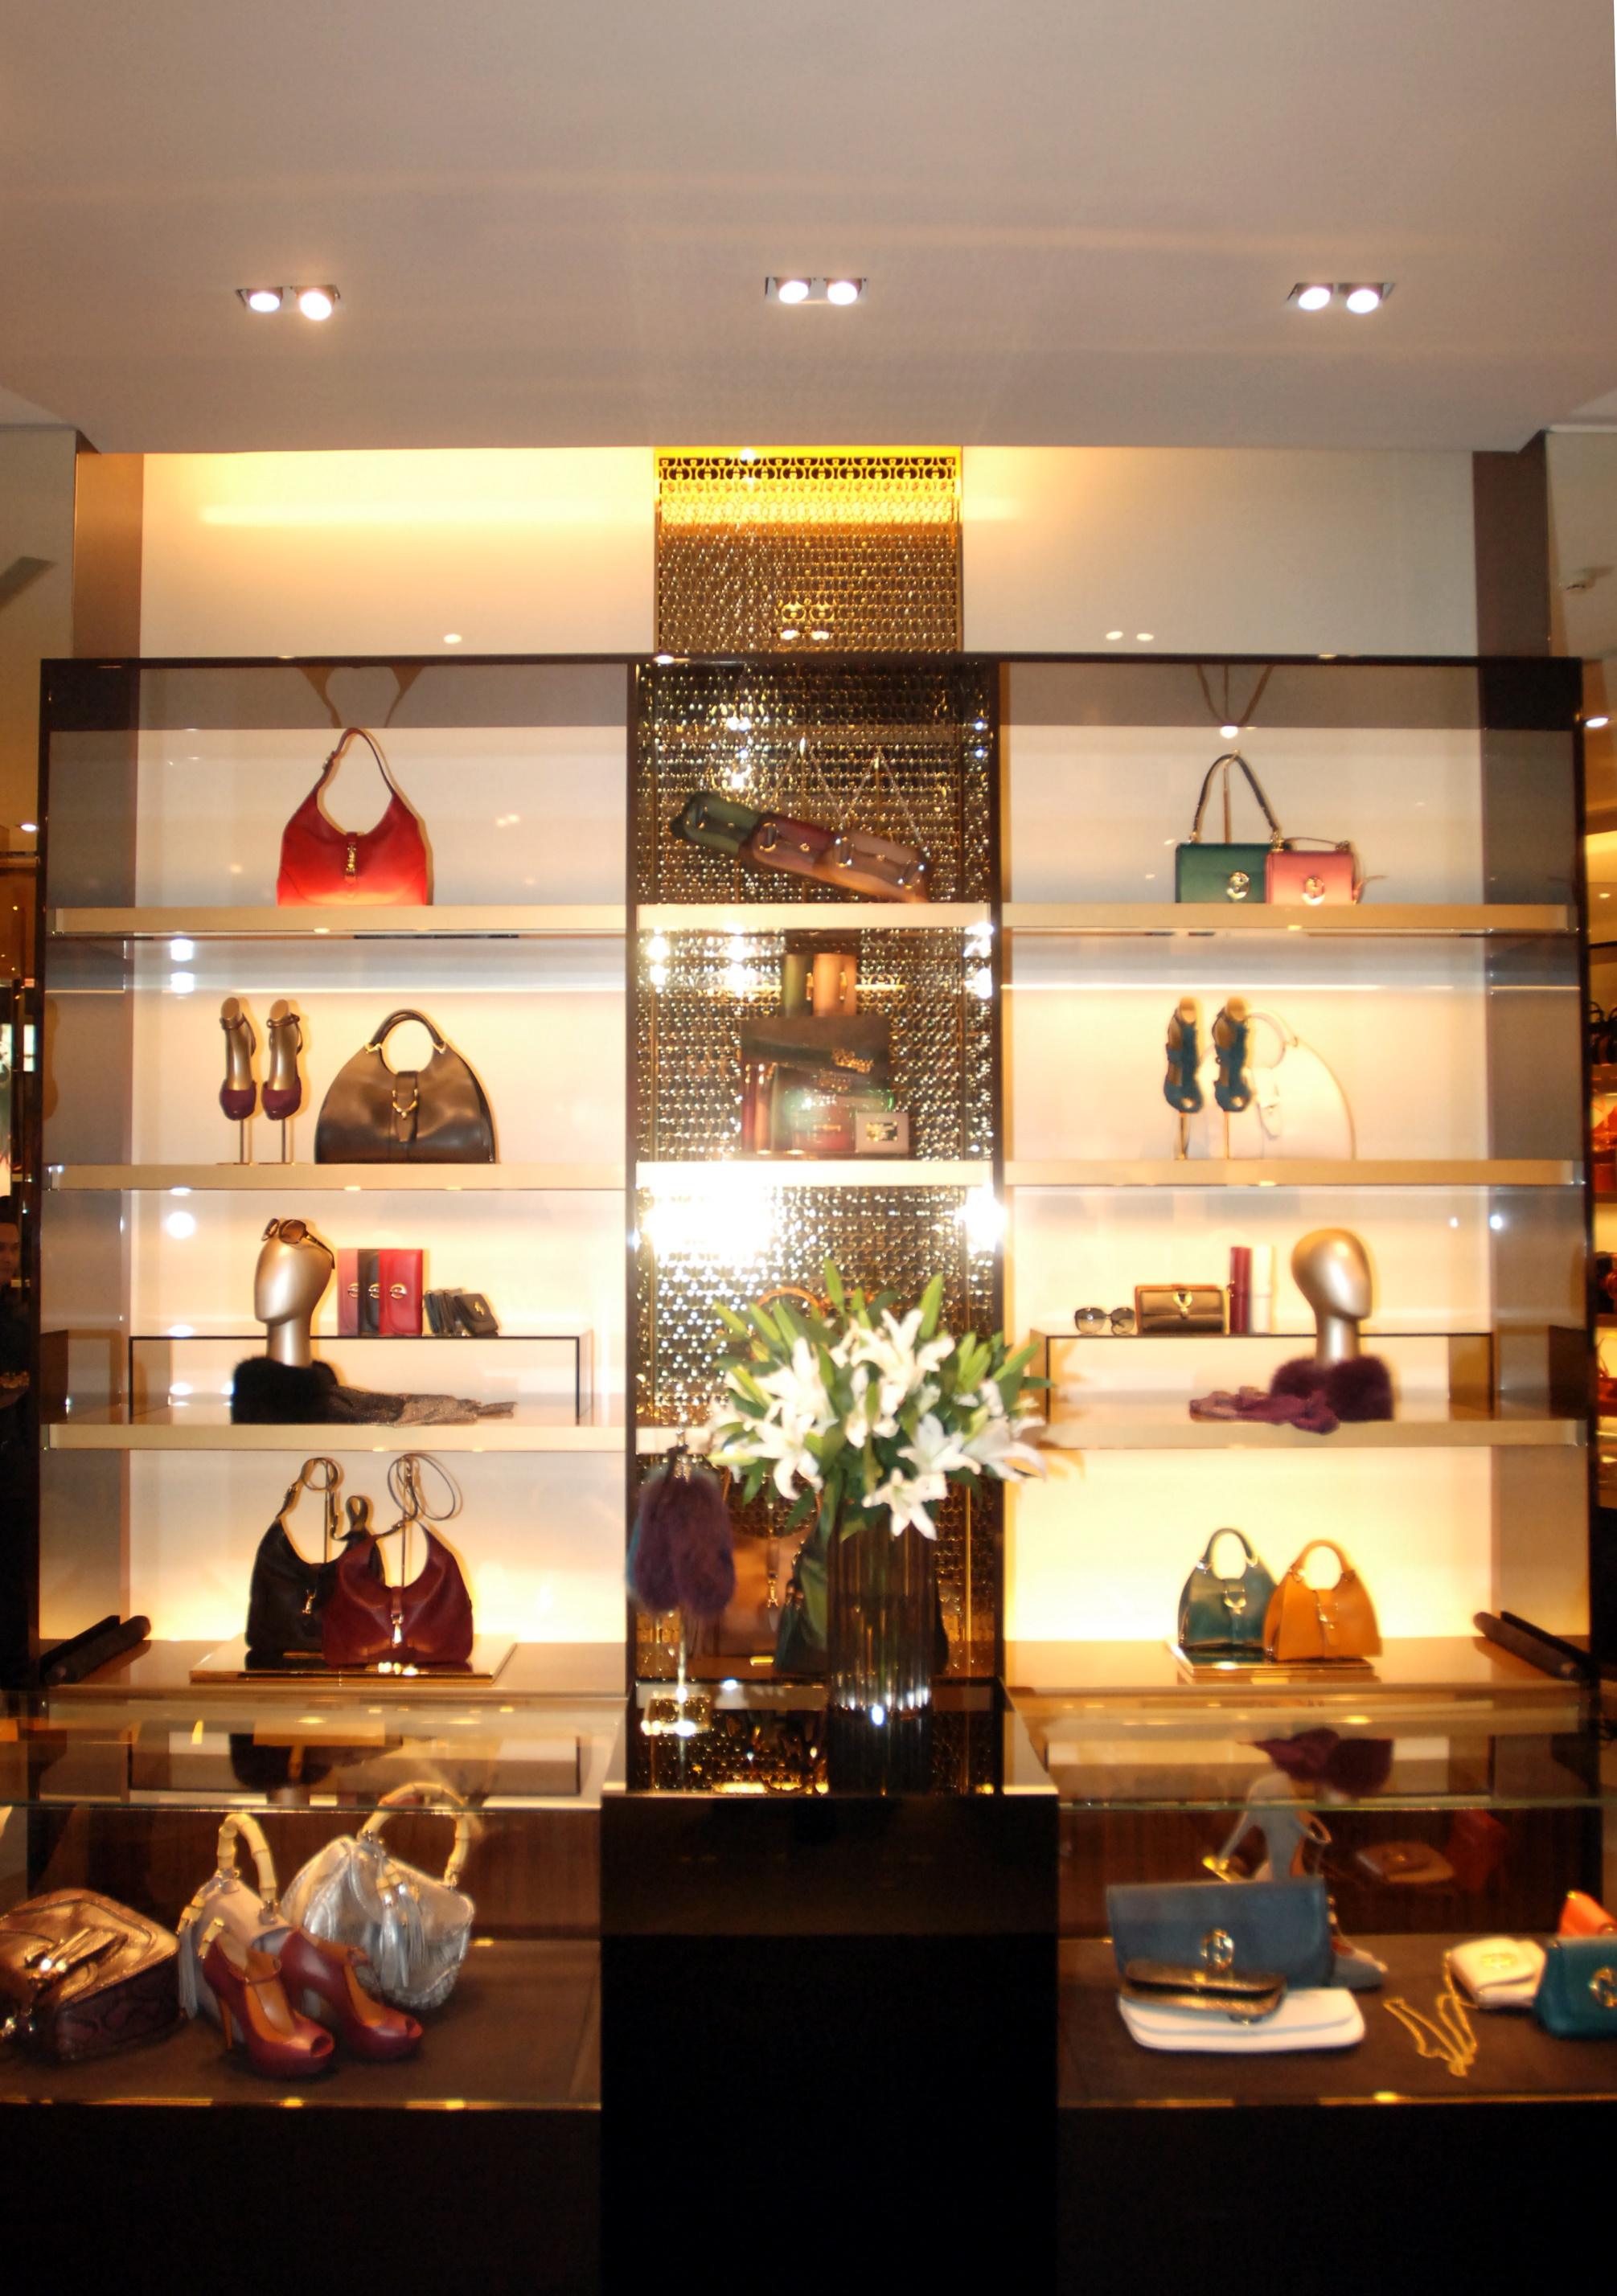 Gucci’s Greenbelt shop reopens on 11.11.11 | Lifestyle.INQ